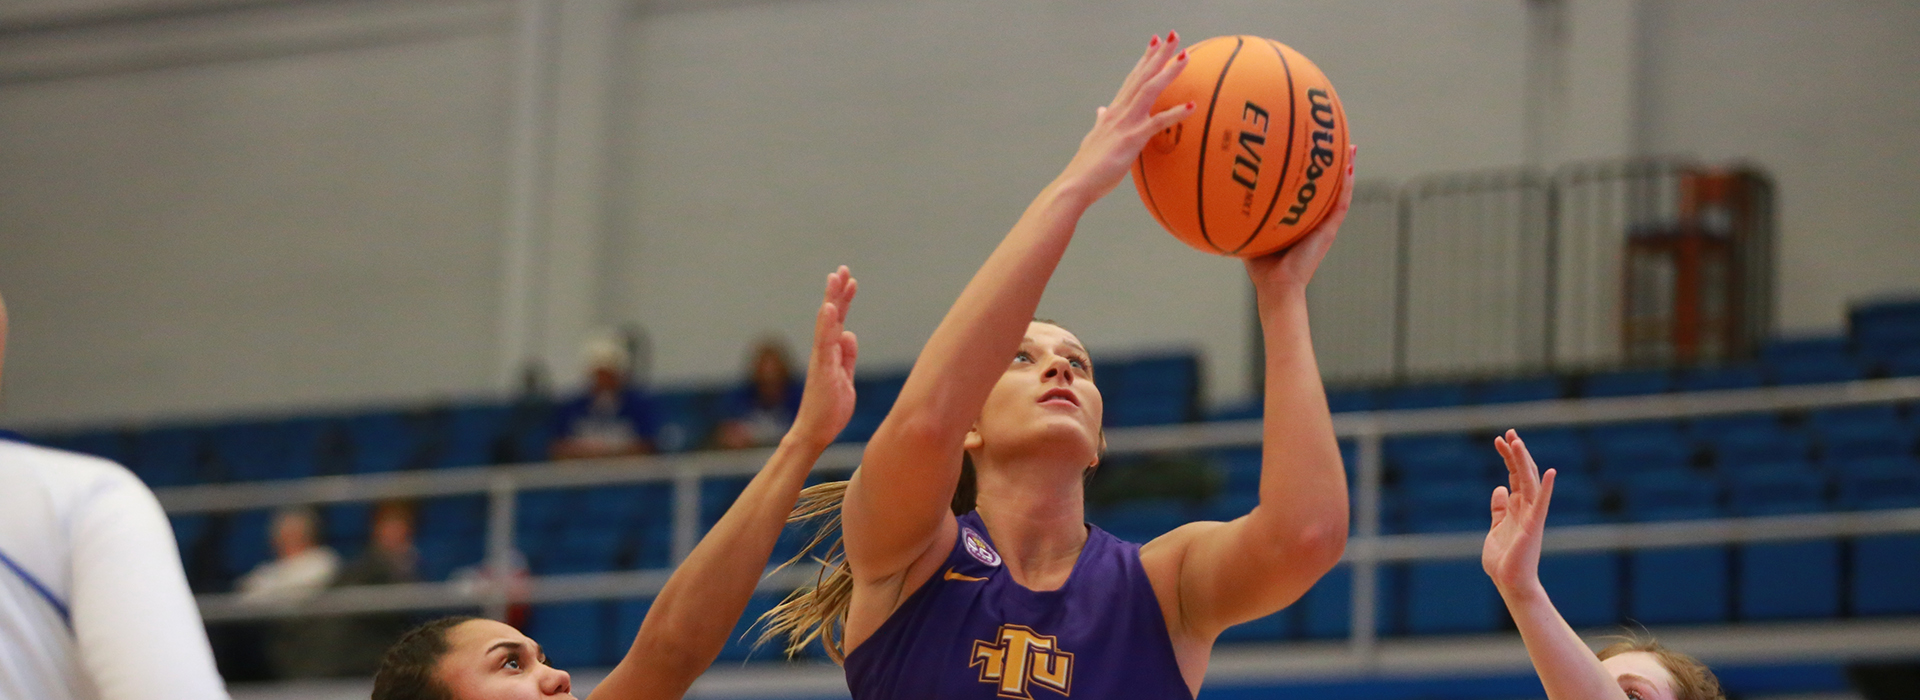 Coleman gets double-double to pace Tech women to win at EIU